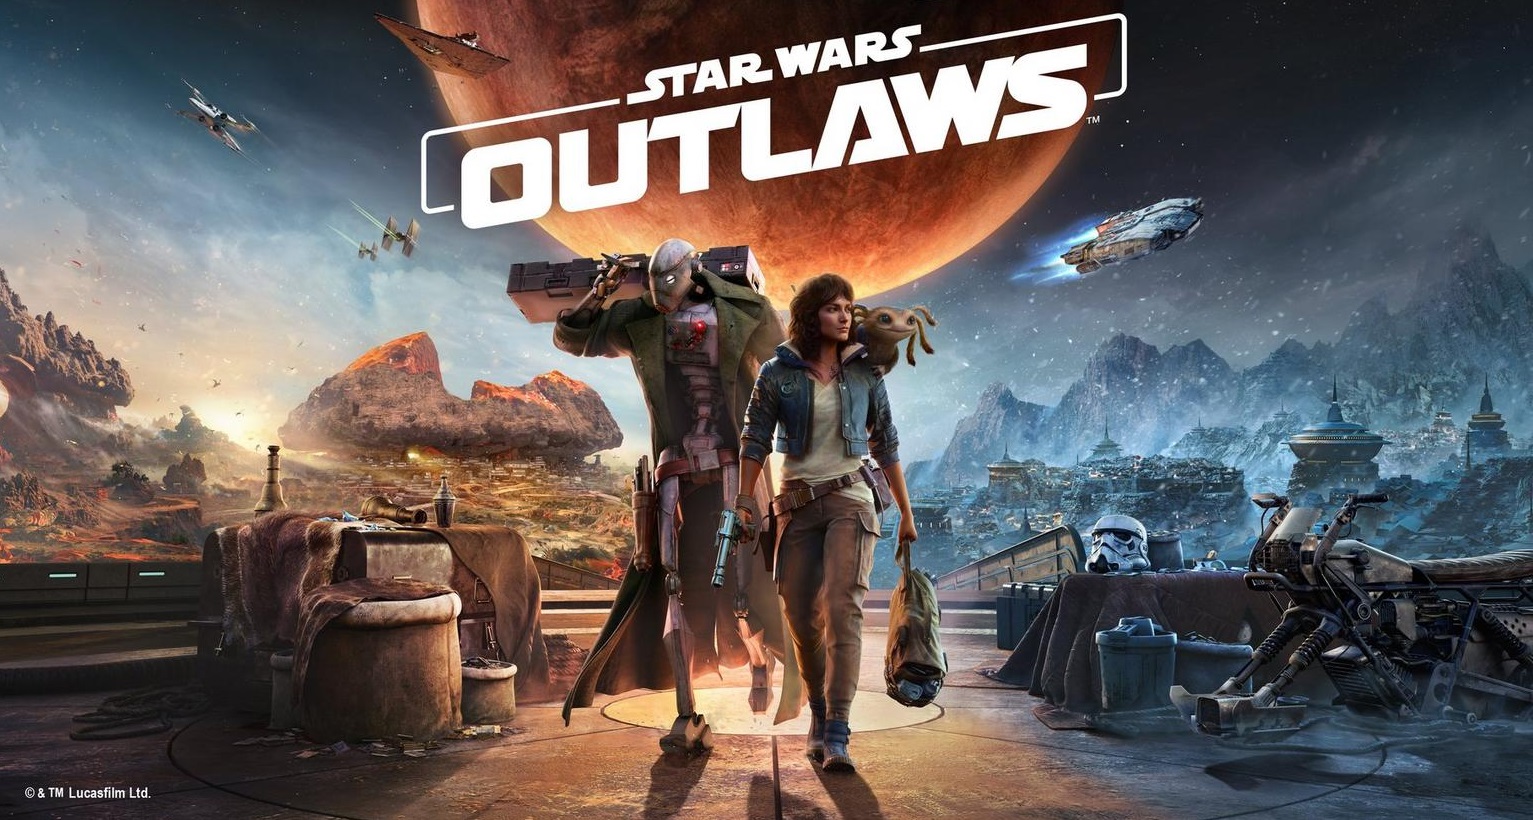 DLSS and RTXDI are coming to Star Wars Outlaws at launch – Nvidia confirms